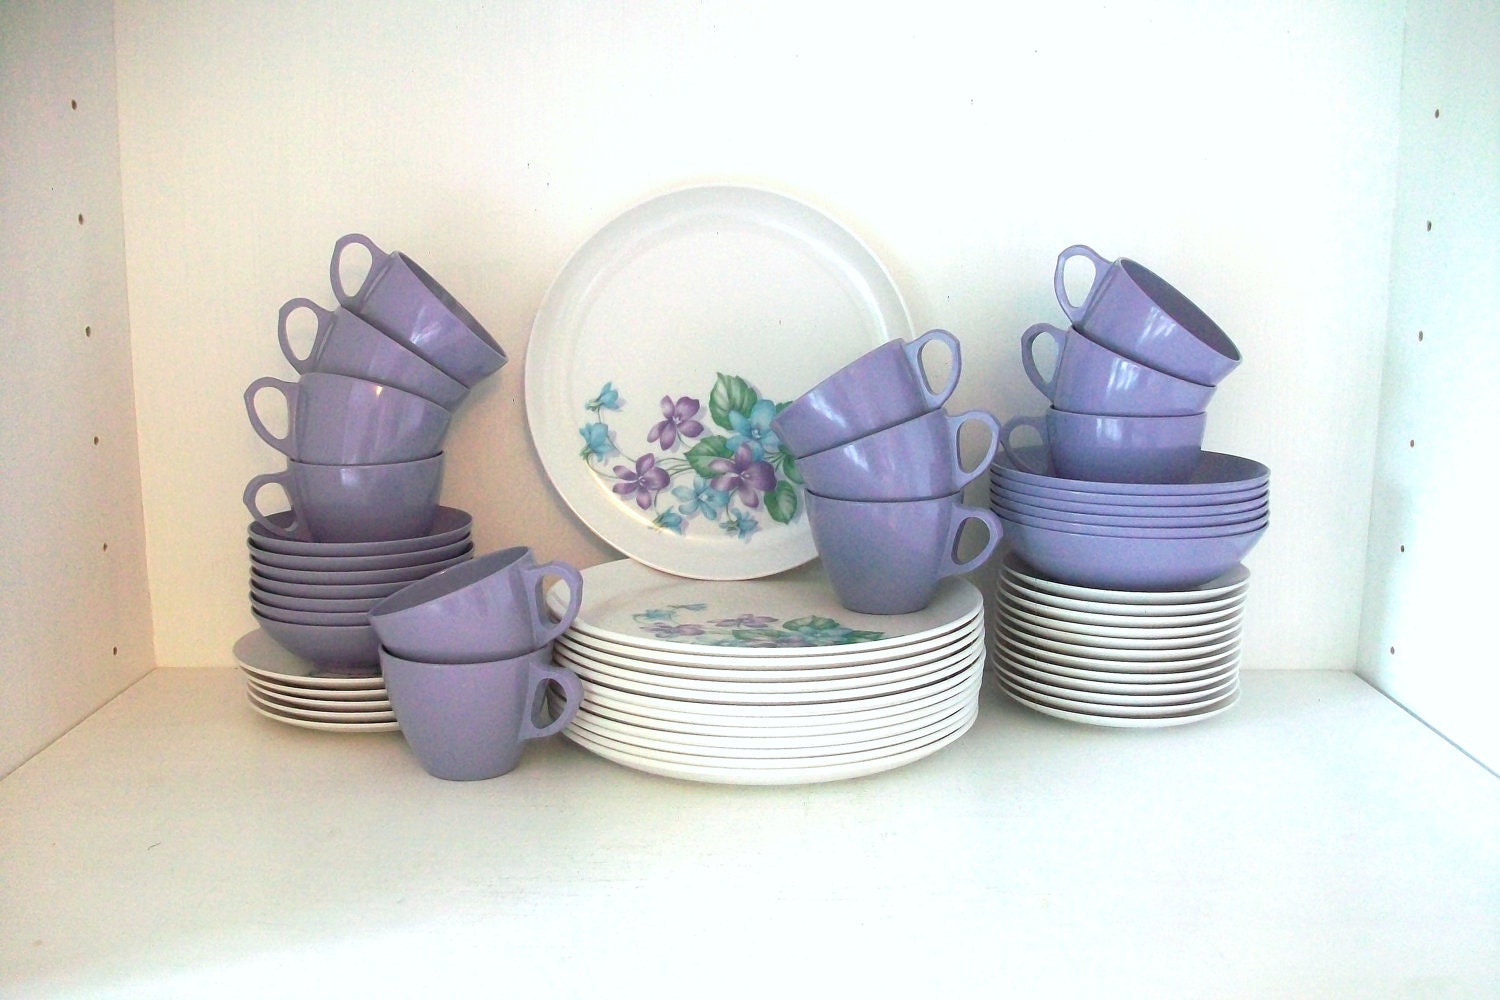 SUPER SALE- Collection Of Purple And White Vintage Melmac Dishes